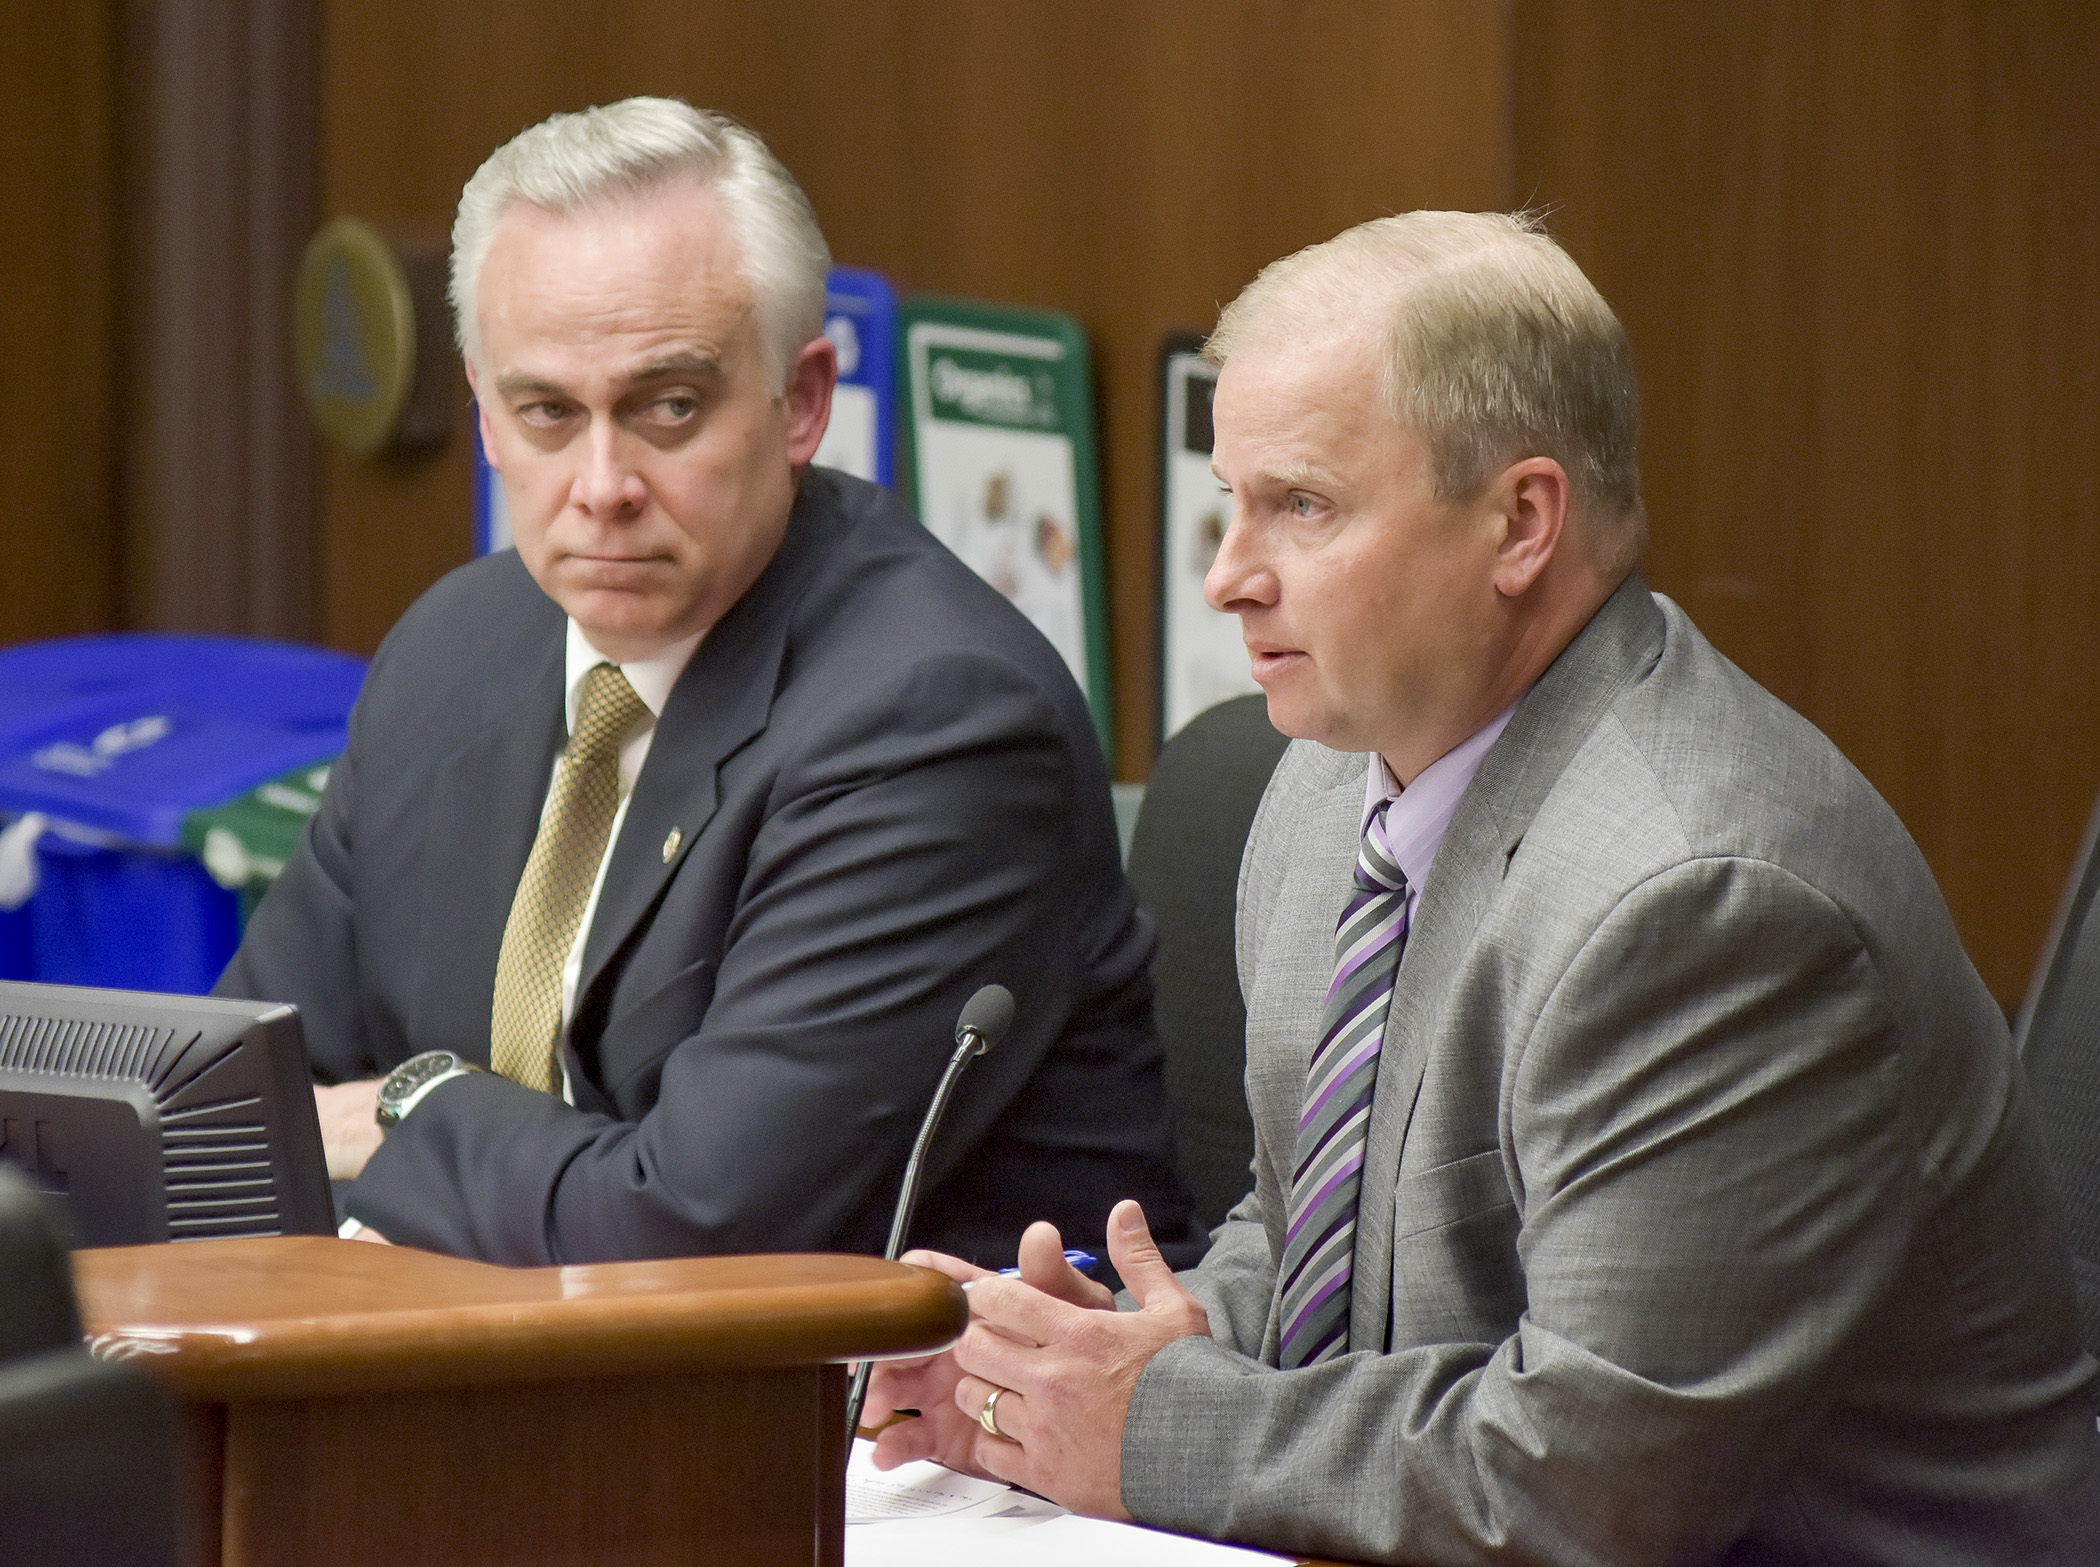 Jeff Bradley, president of the Mental Health Providers Association of Minnesota, testifies before the House Health and Human Services Finance Committee March 23 in support of a bill sponsored by Rep. Tony Albright, left, that would modify group residential housing eligibility. Photo by Andrew VonBank